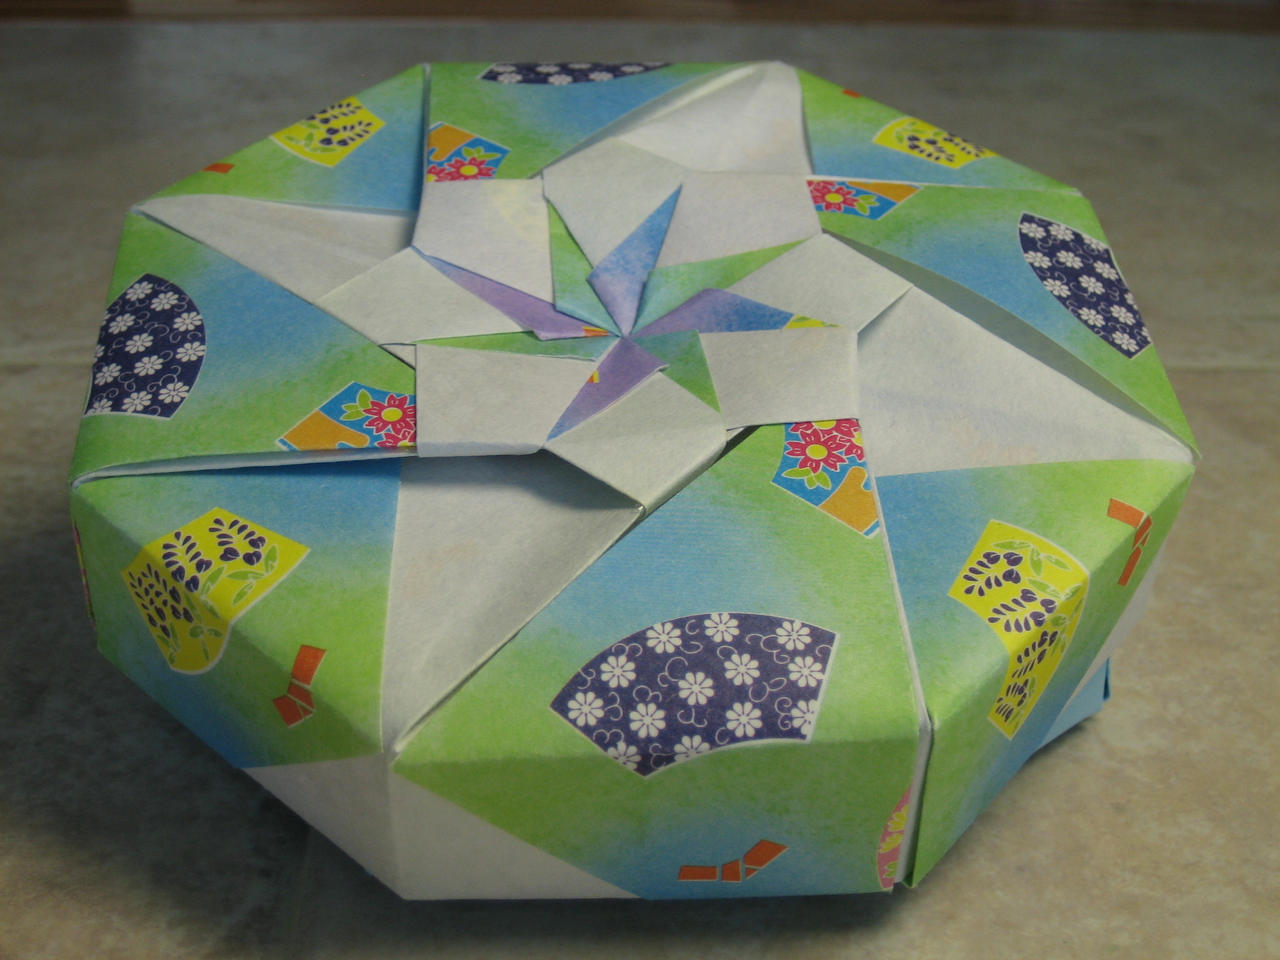 Joyful Origami Boxes by Tomoko Fuse by PaperChang on DeviantArt